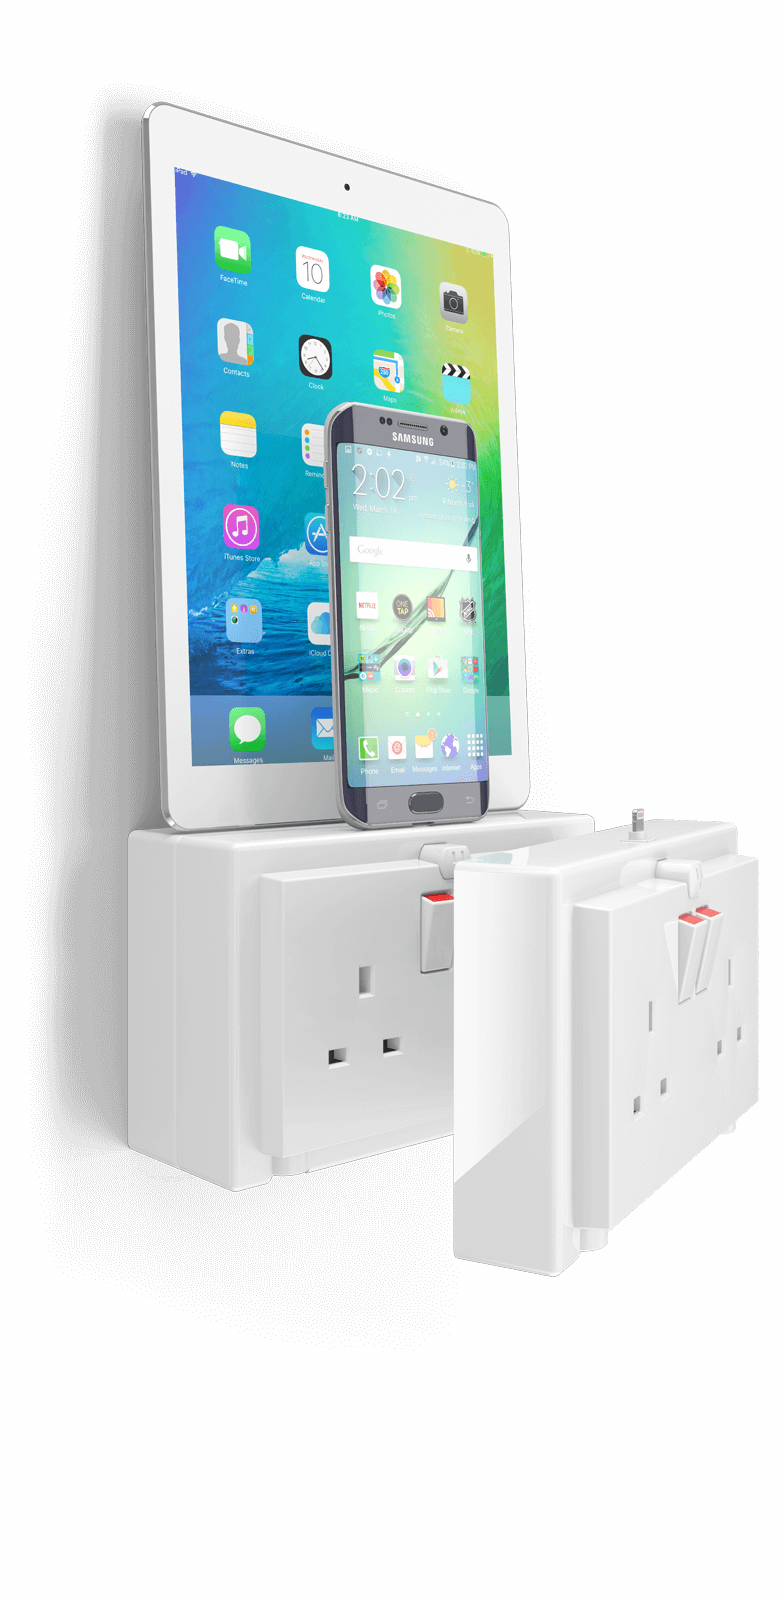 thingcharger multi charger tablet iPad smartphone-innovative gift ideas